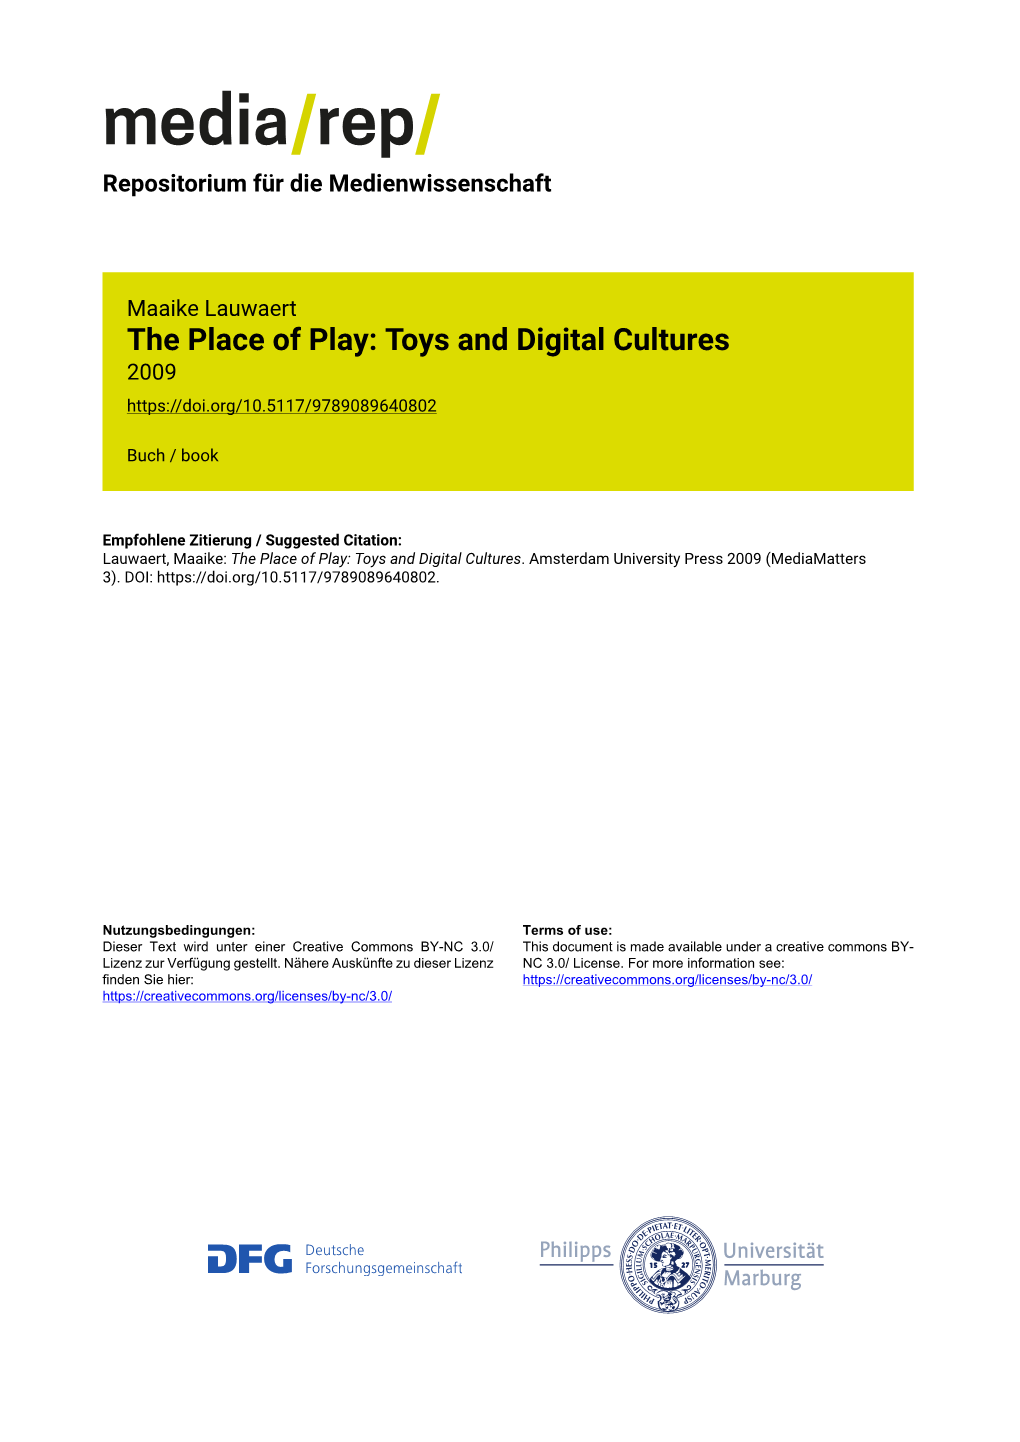 The Place of Play: Toys and Digital Cultures 2009